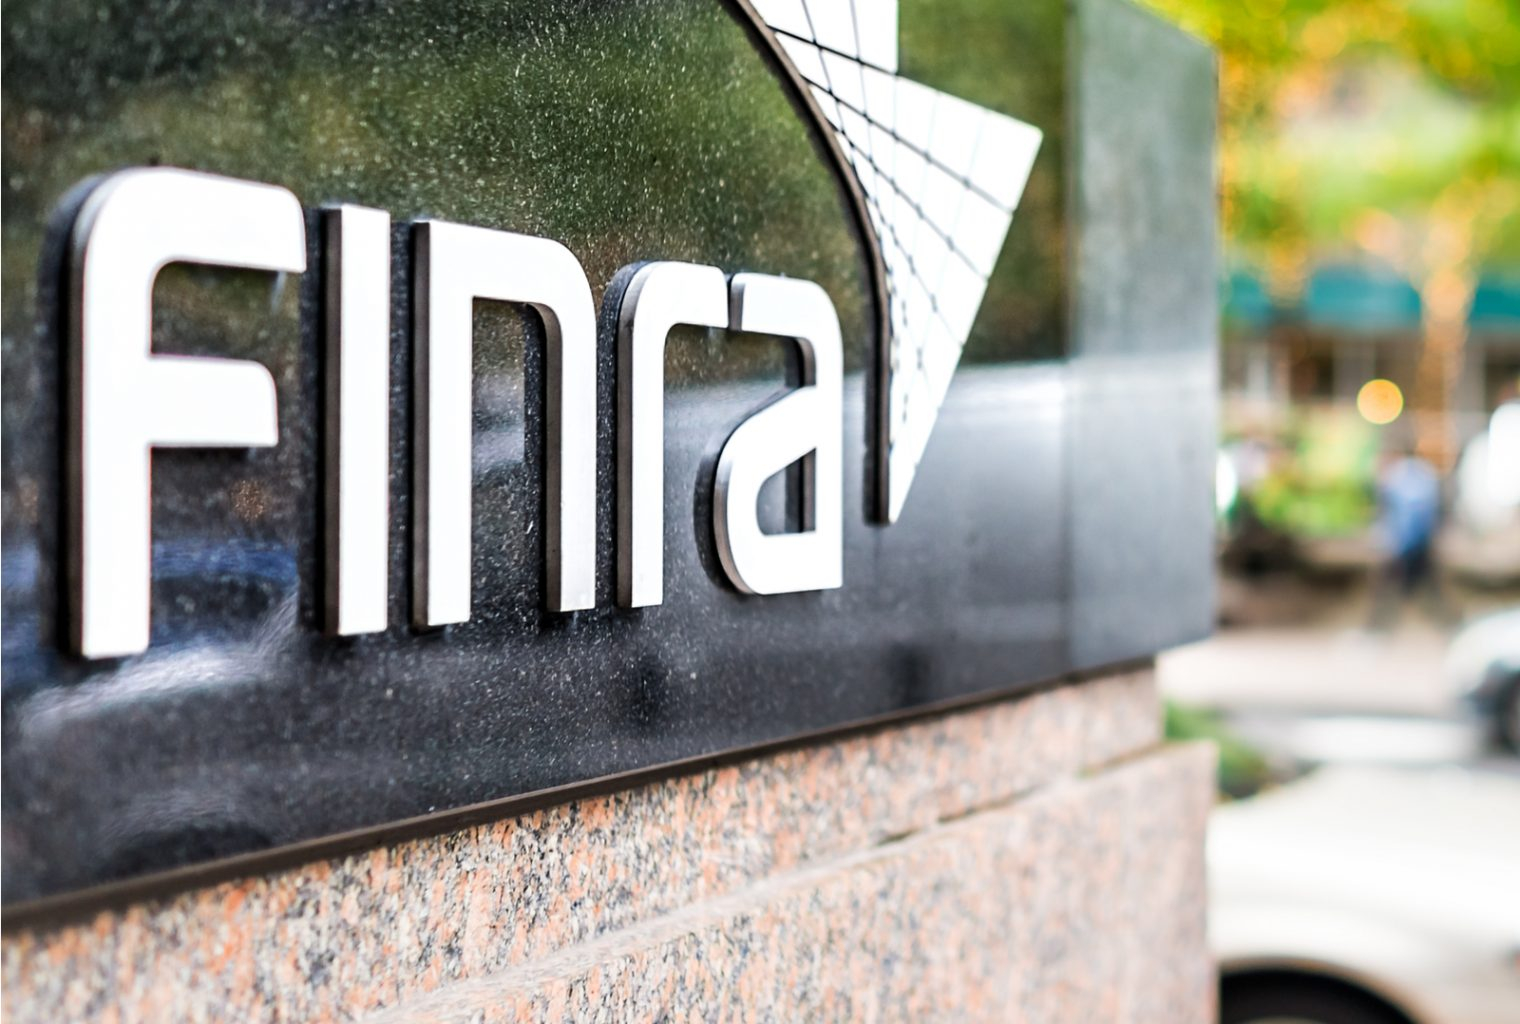 Finra Membership Agreement Trading Sanctions Imposed On Tezos Co Founder Amid Finra Settlement